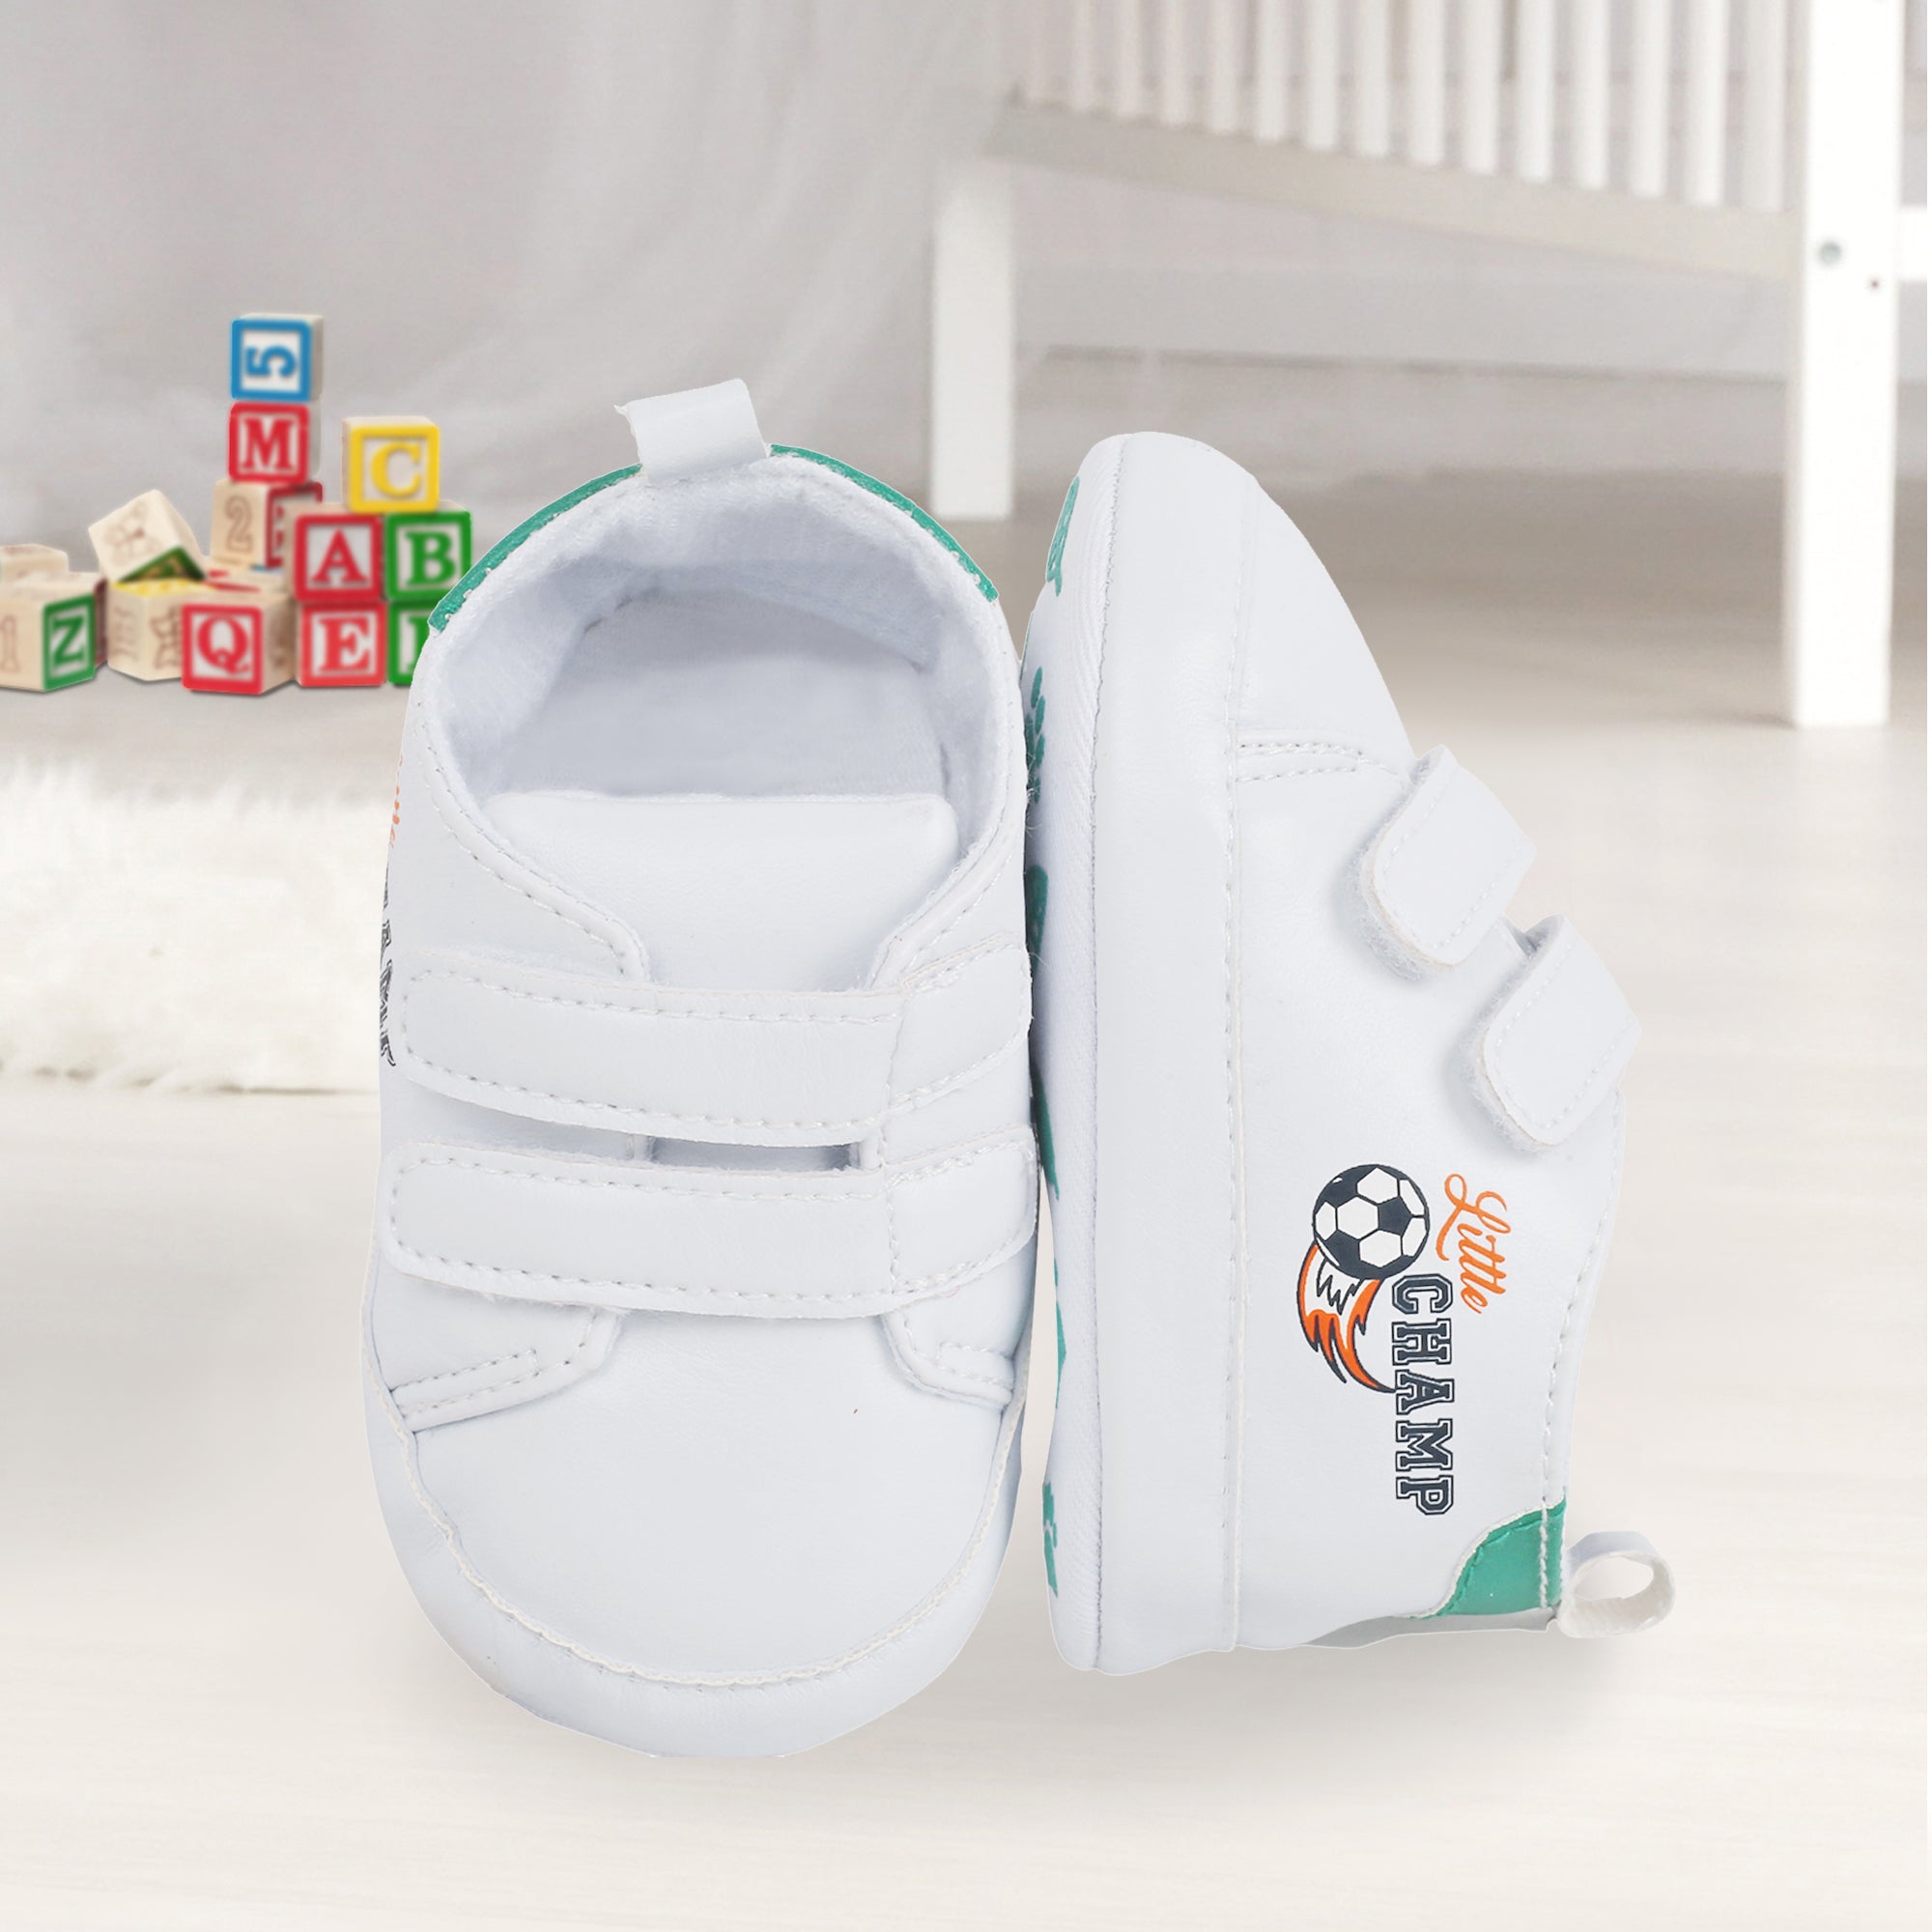 Baby Moo Little Champ White Velcro Sneakers - Baby Moo